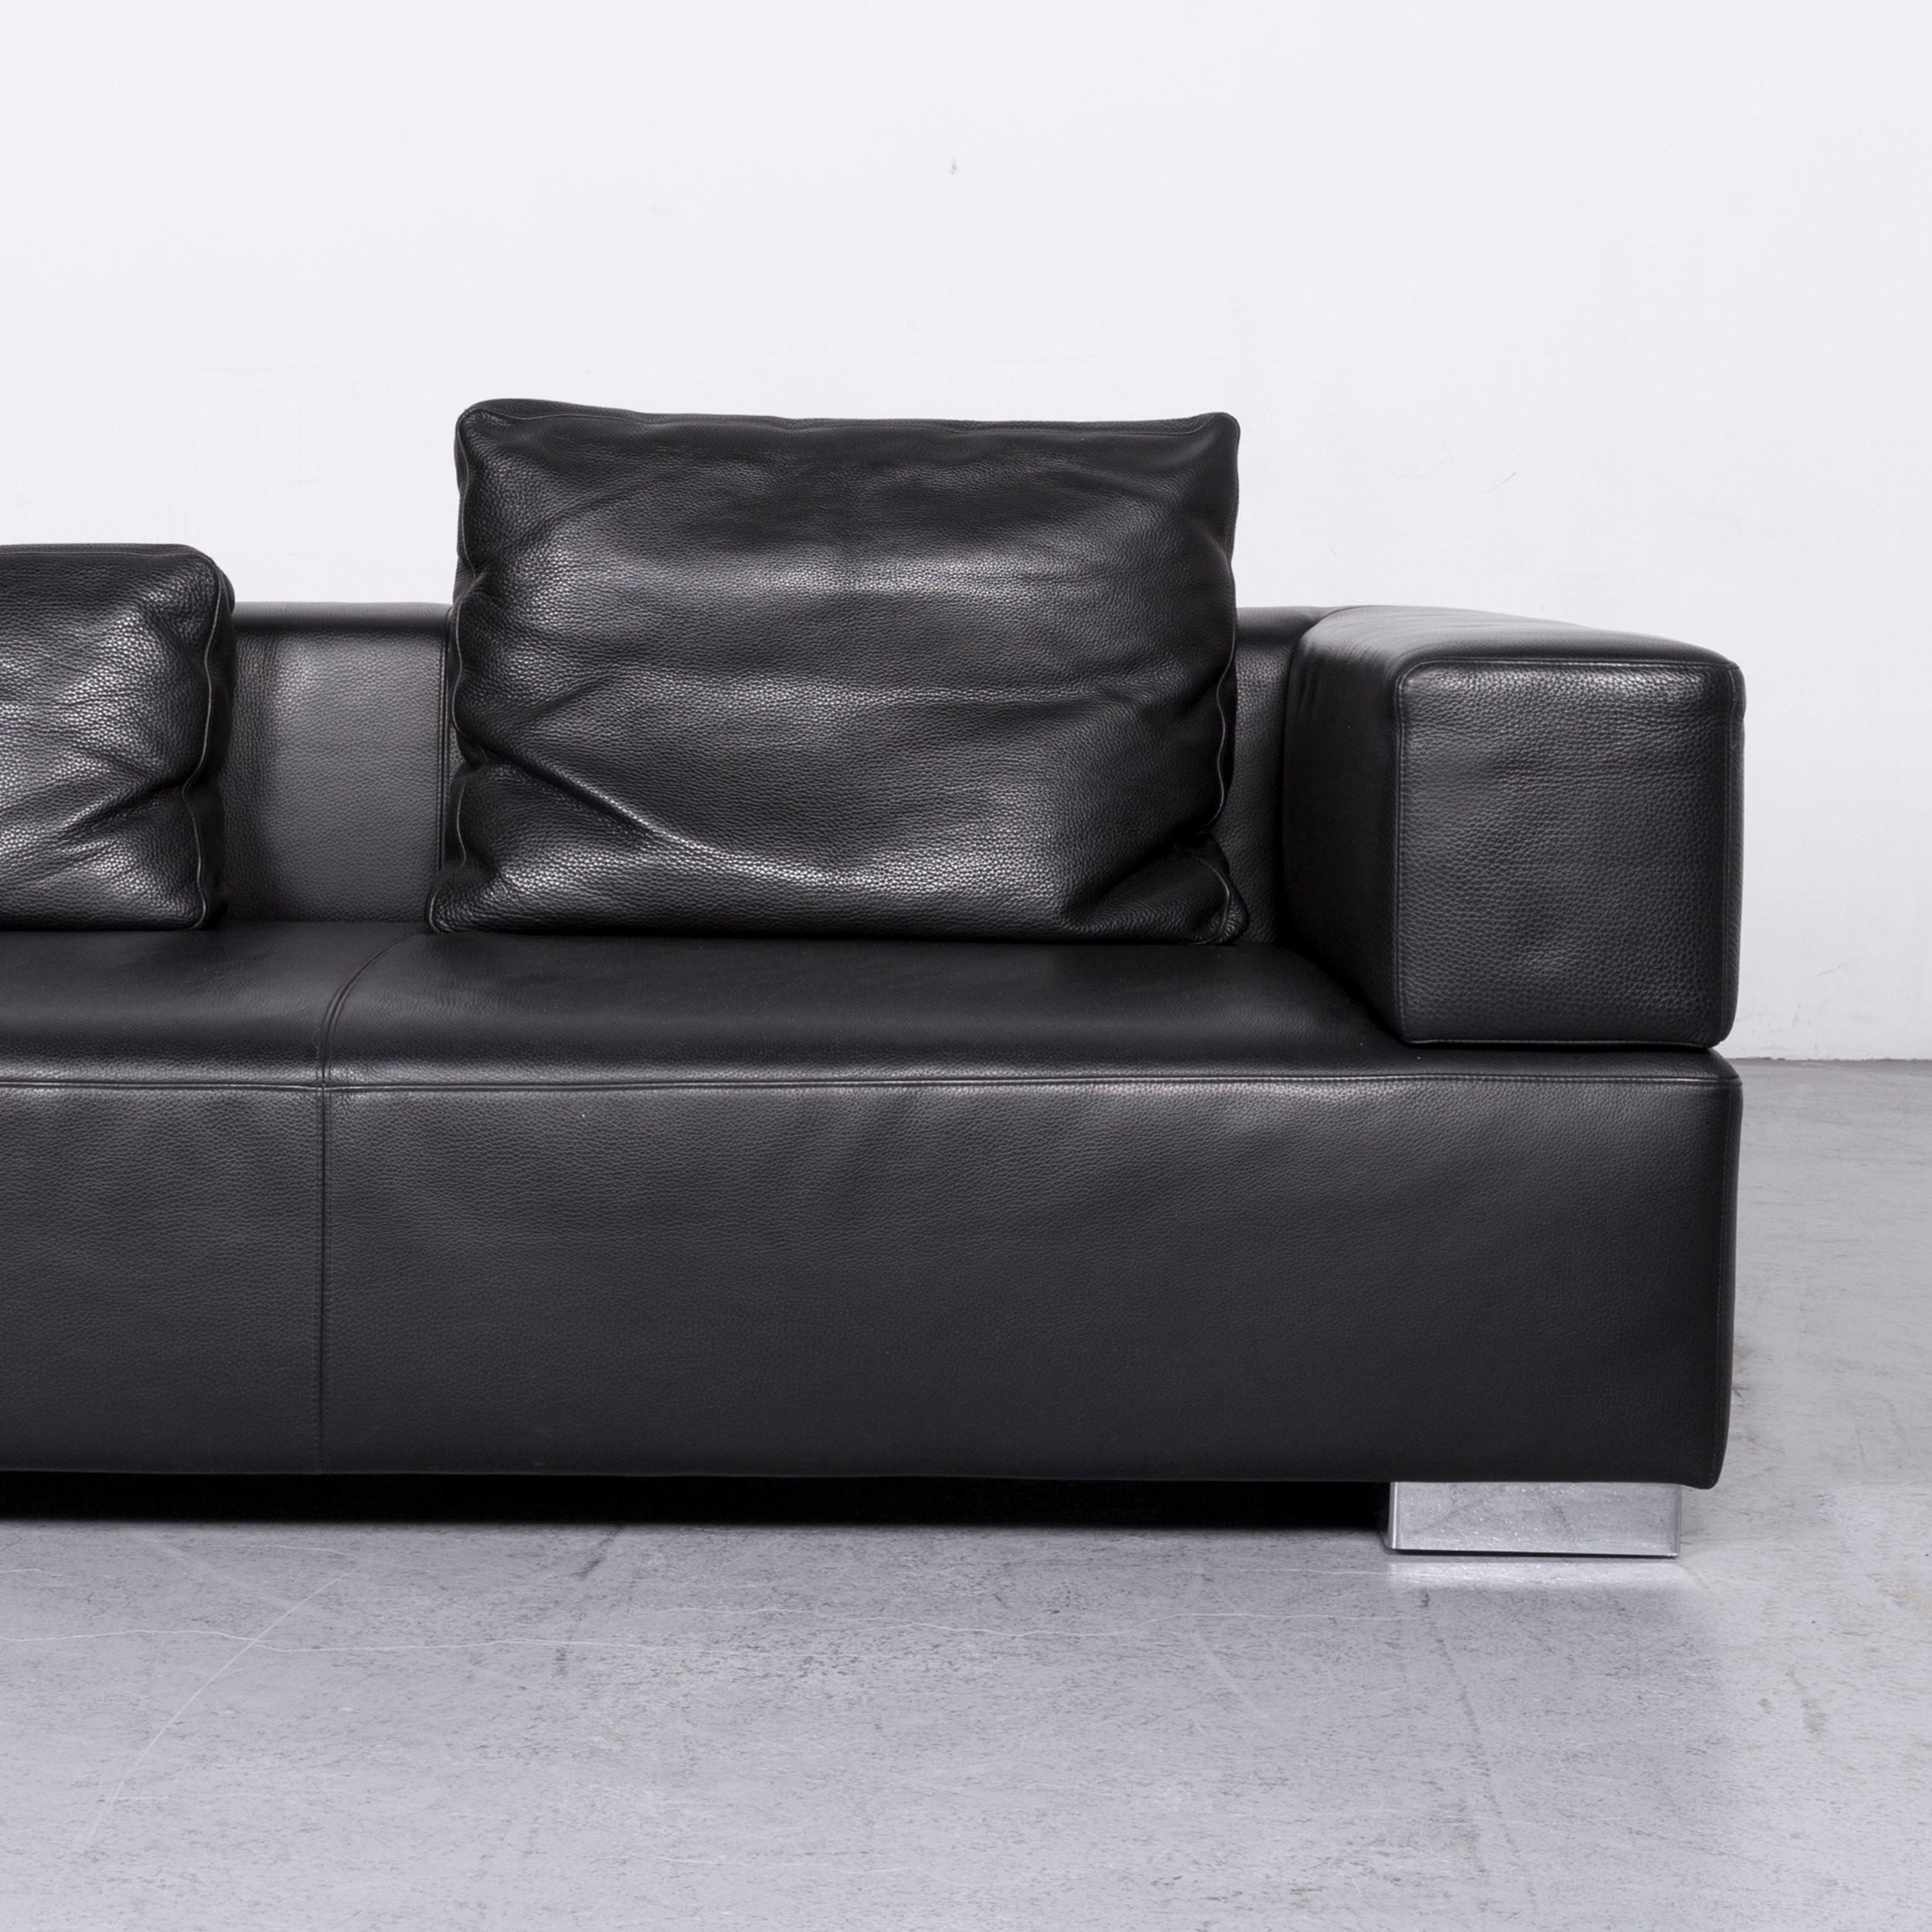 Brühl & Sippold Designer Sofa Set Leather Black Two-Seat Couch Modern For Sale 9